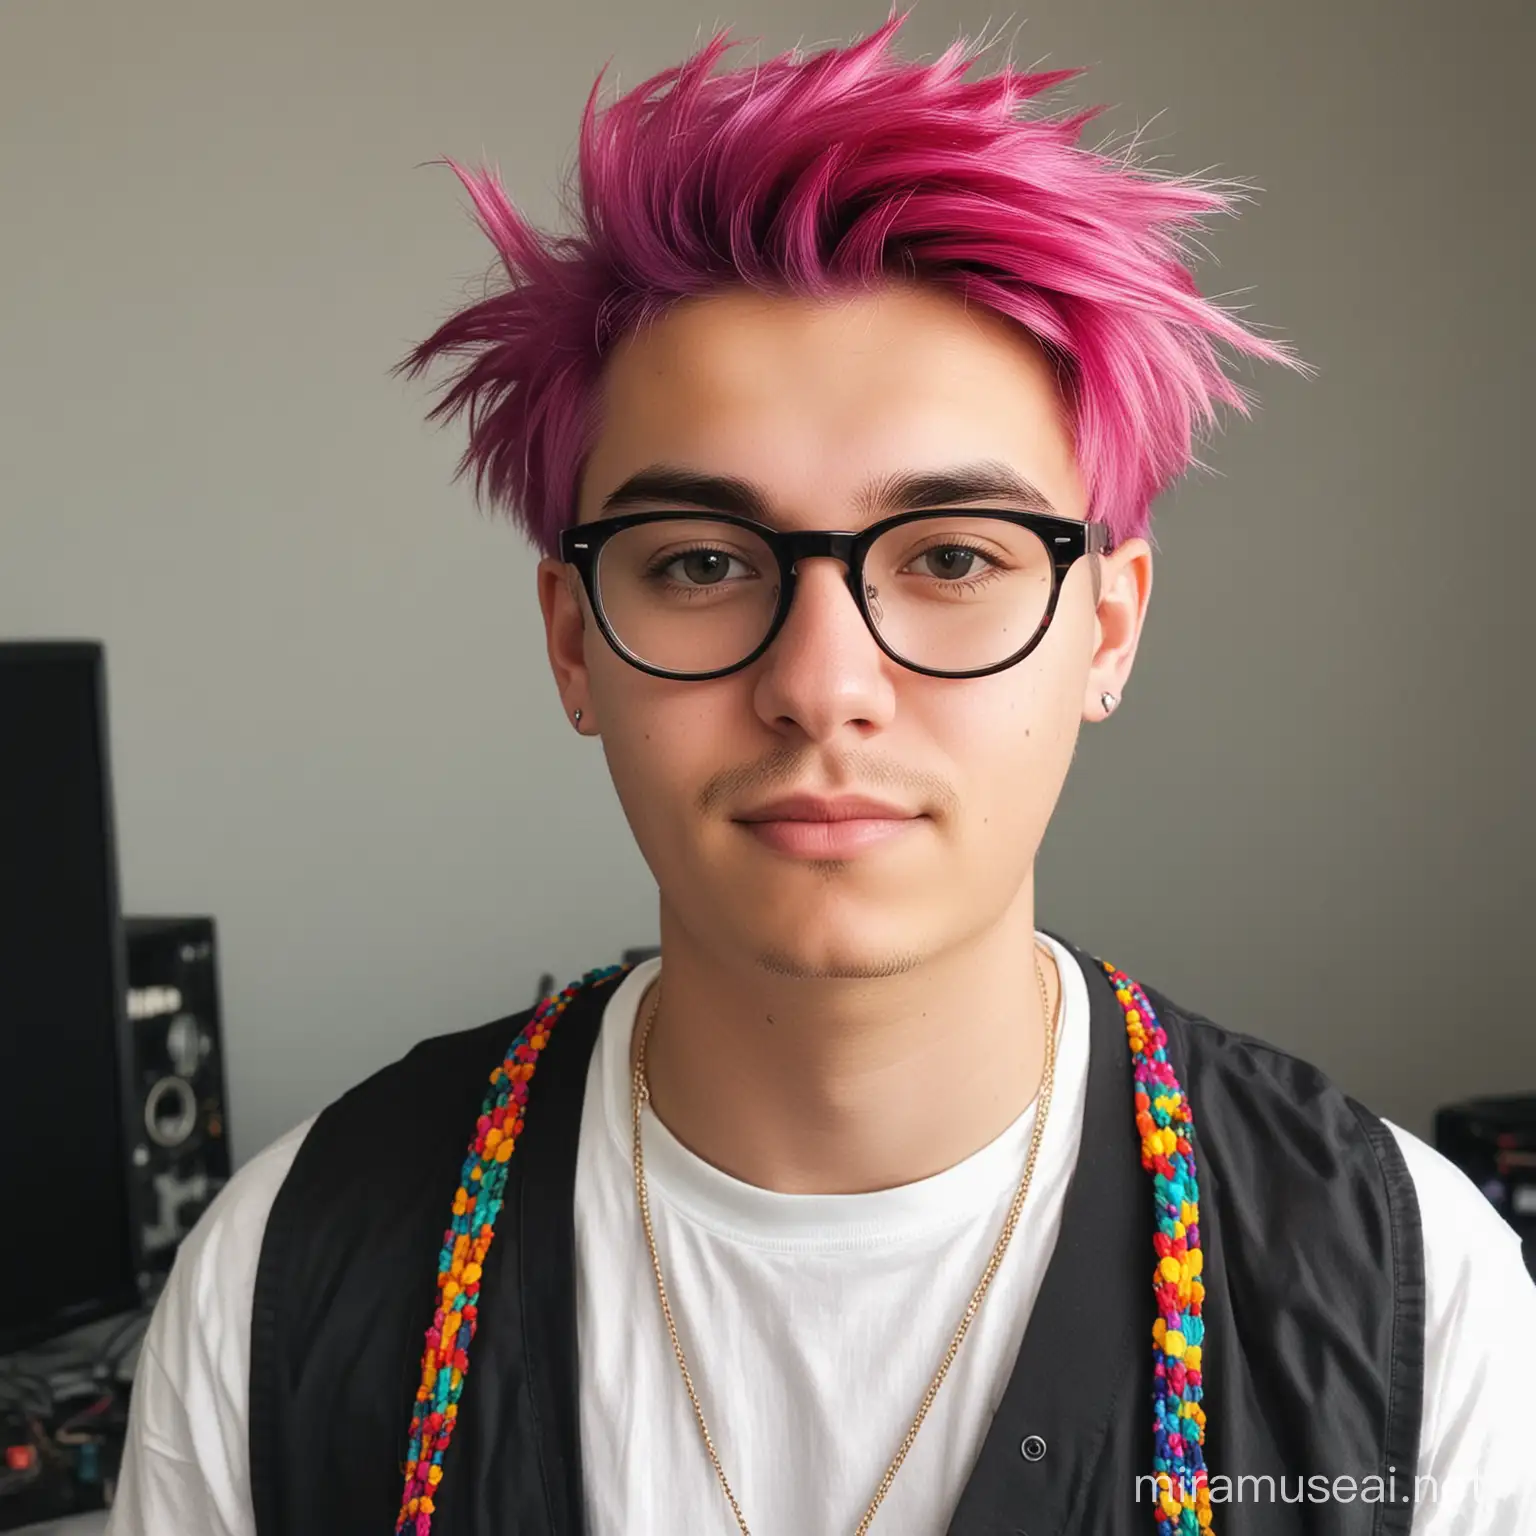 Vibrant 19YearOld Music Production Student with Colorful Hair and Glasses